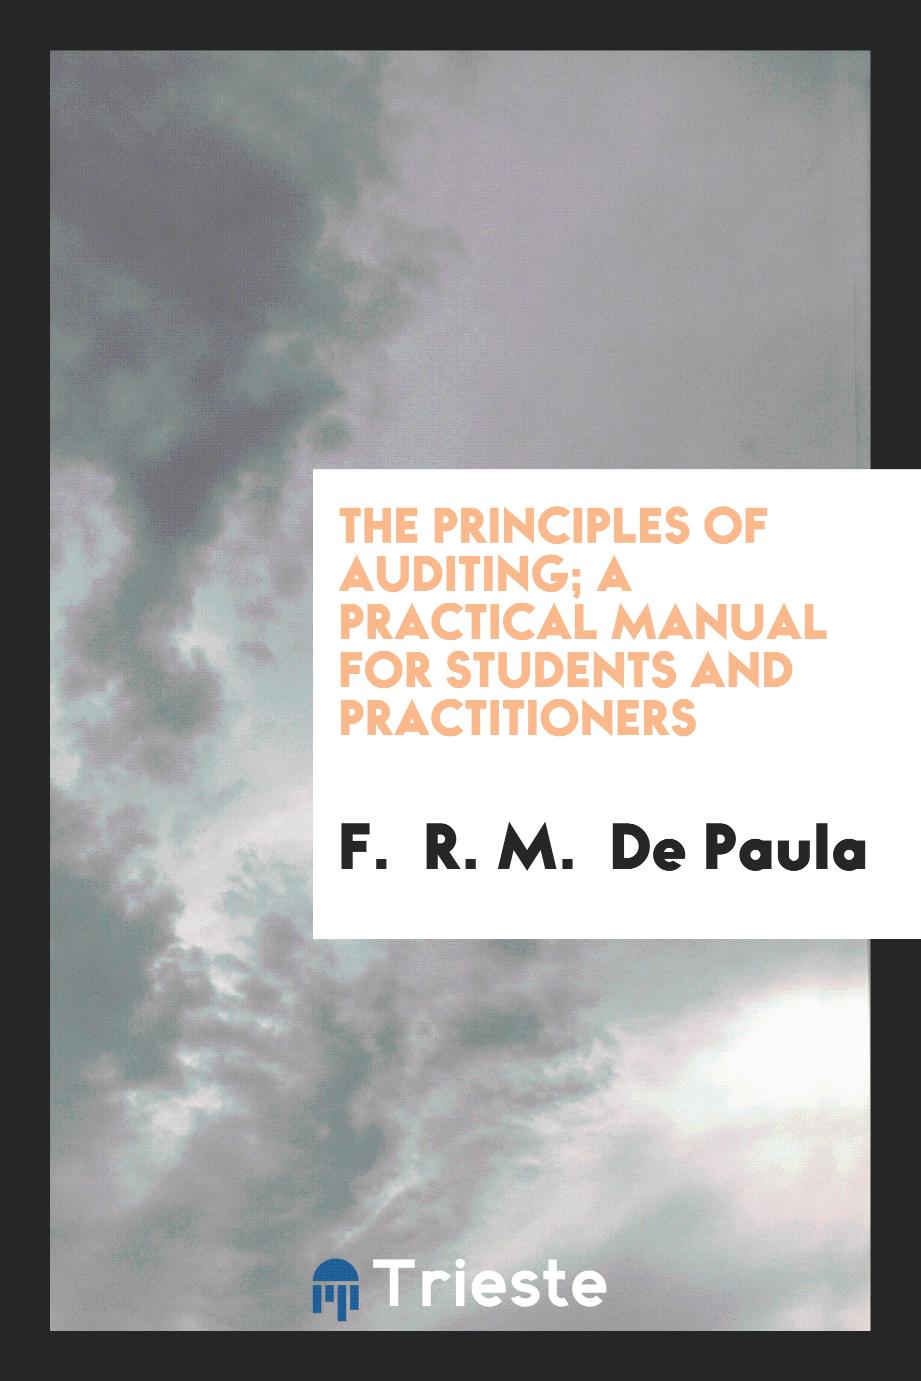 The principles of auditing; a practical manual for students and practitioners